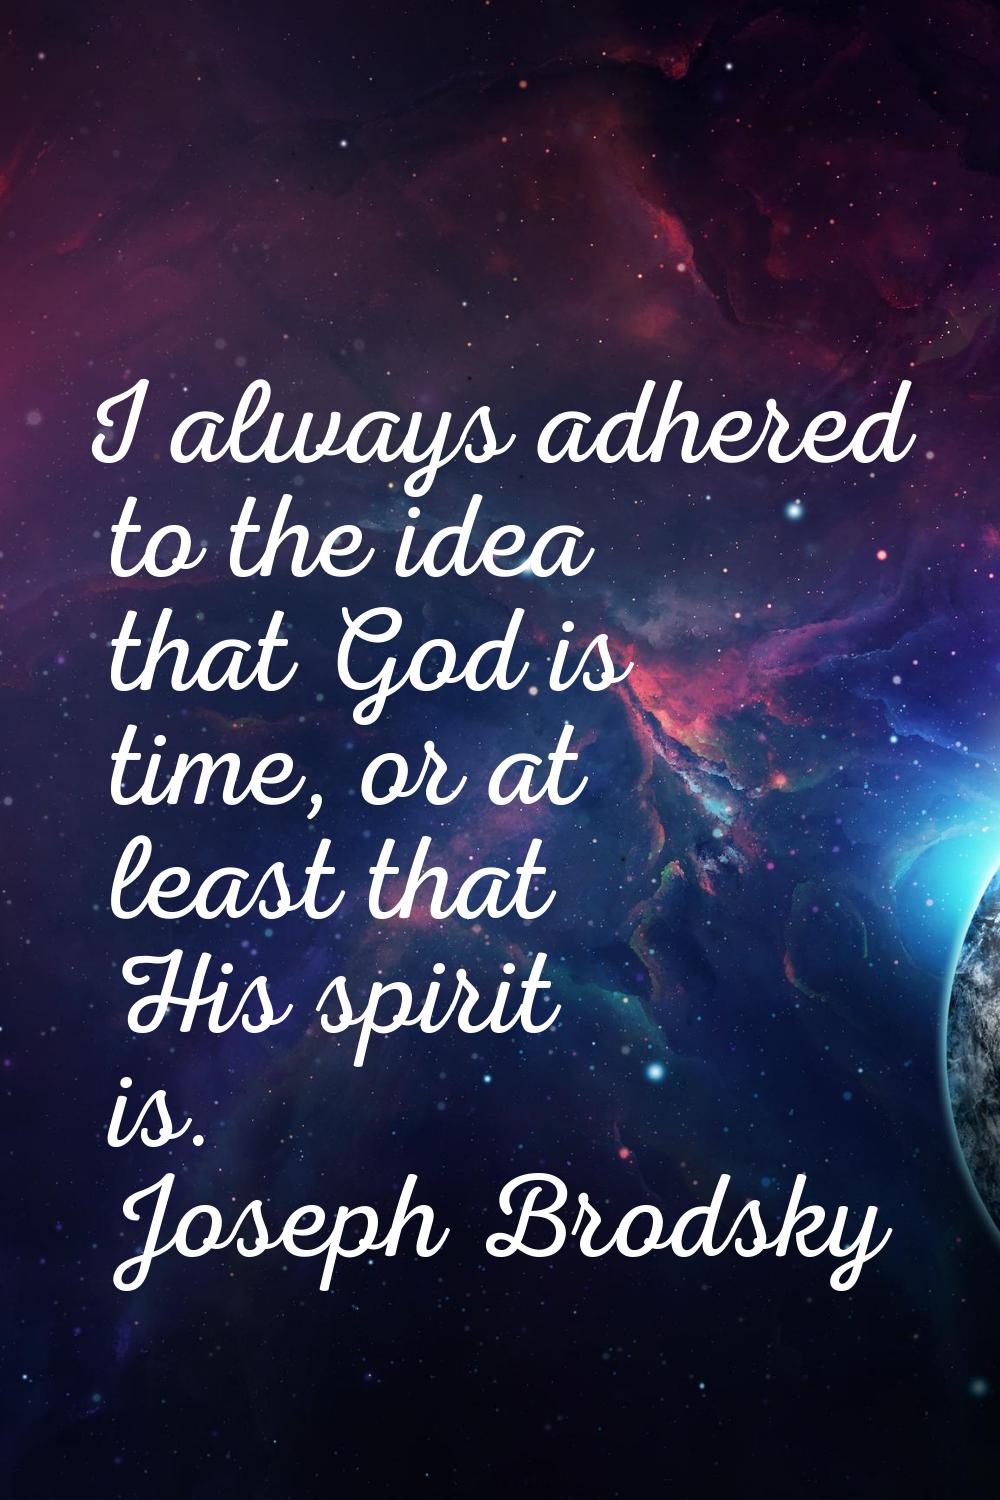 I always adhered to the idea that God is time, or at least that His spirit is.